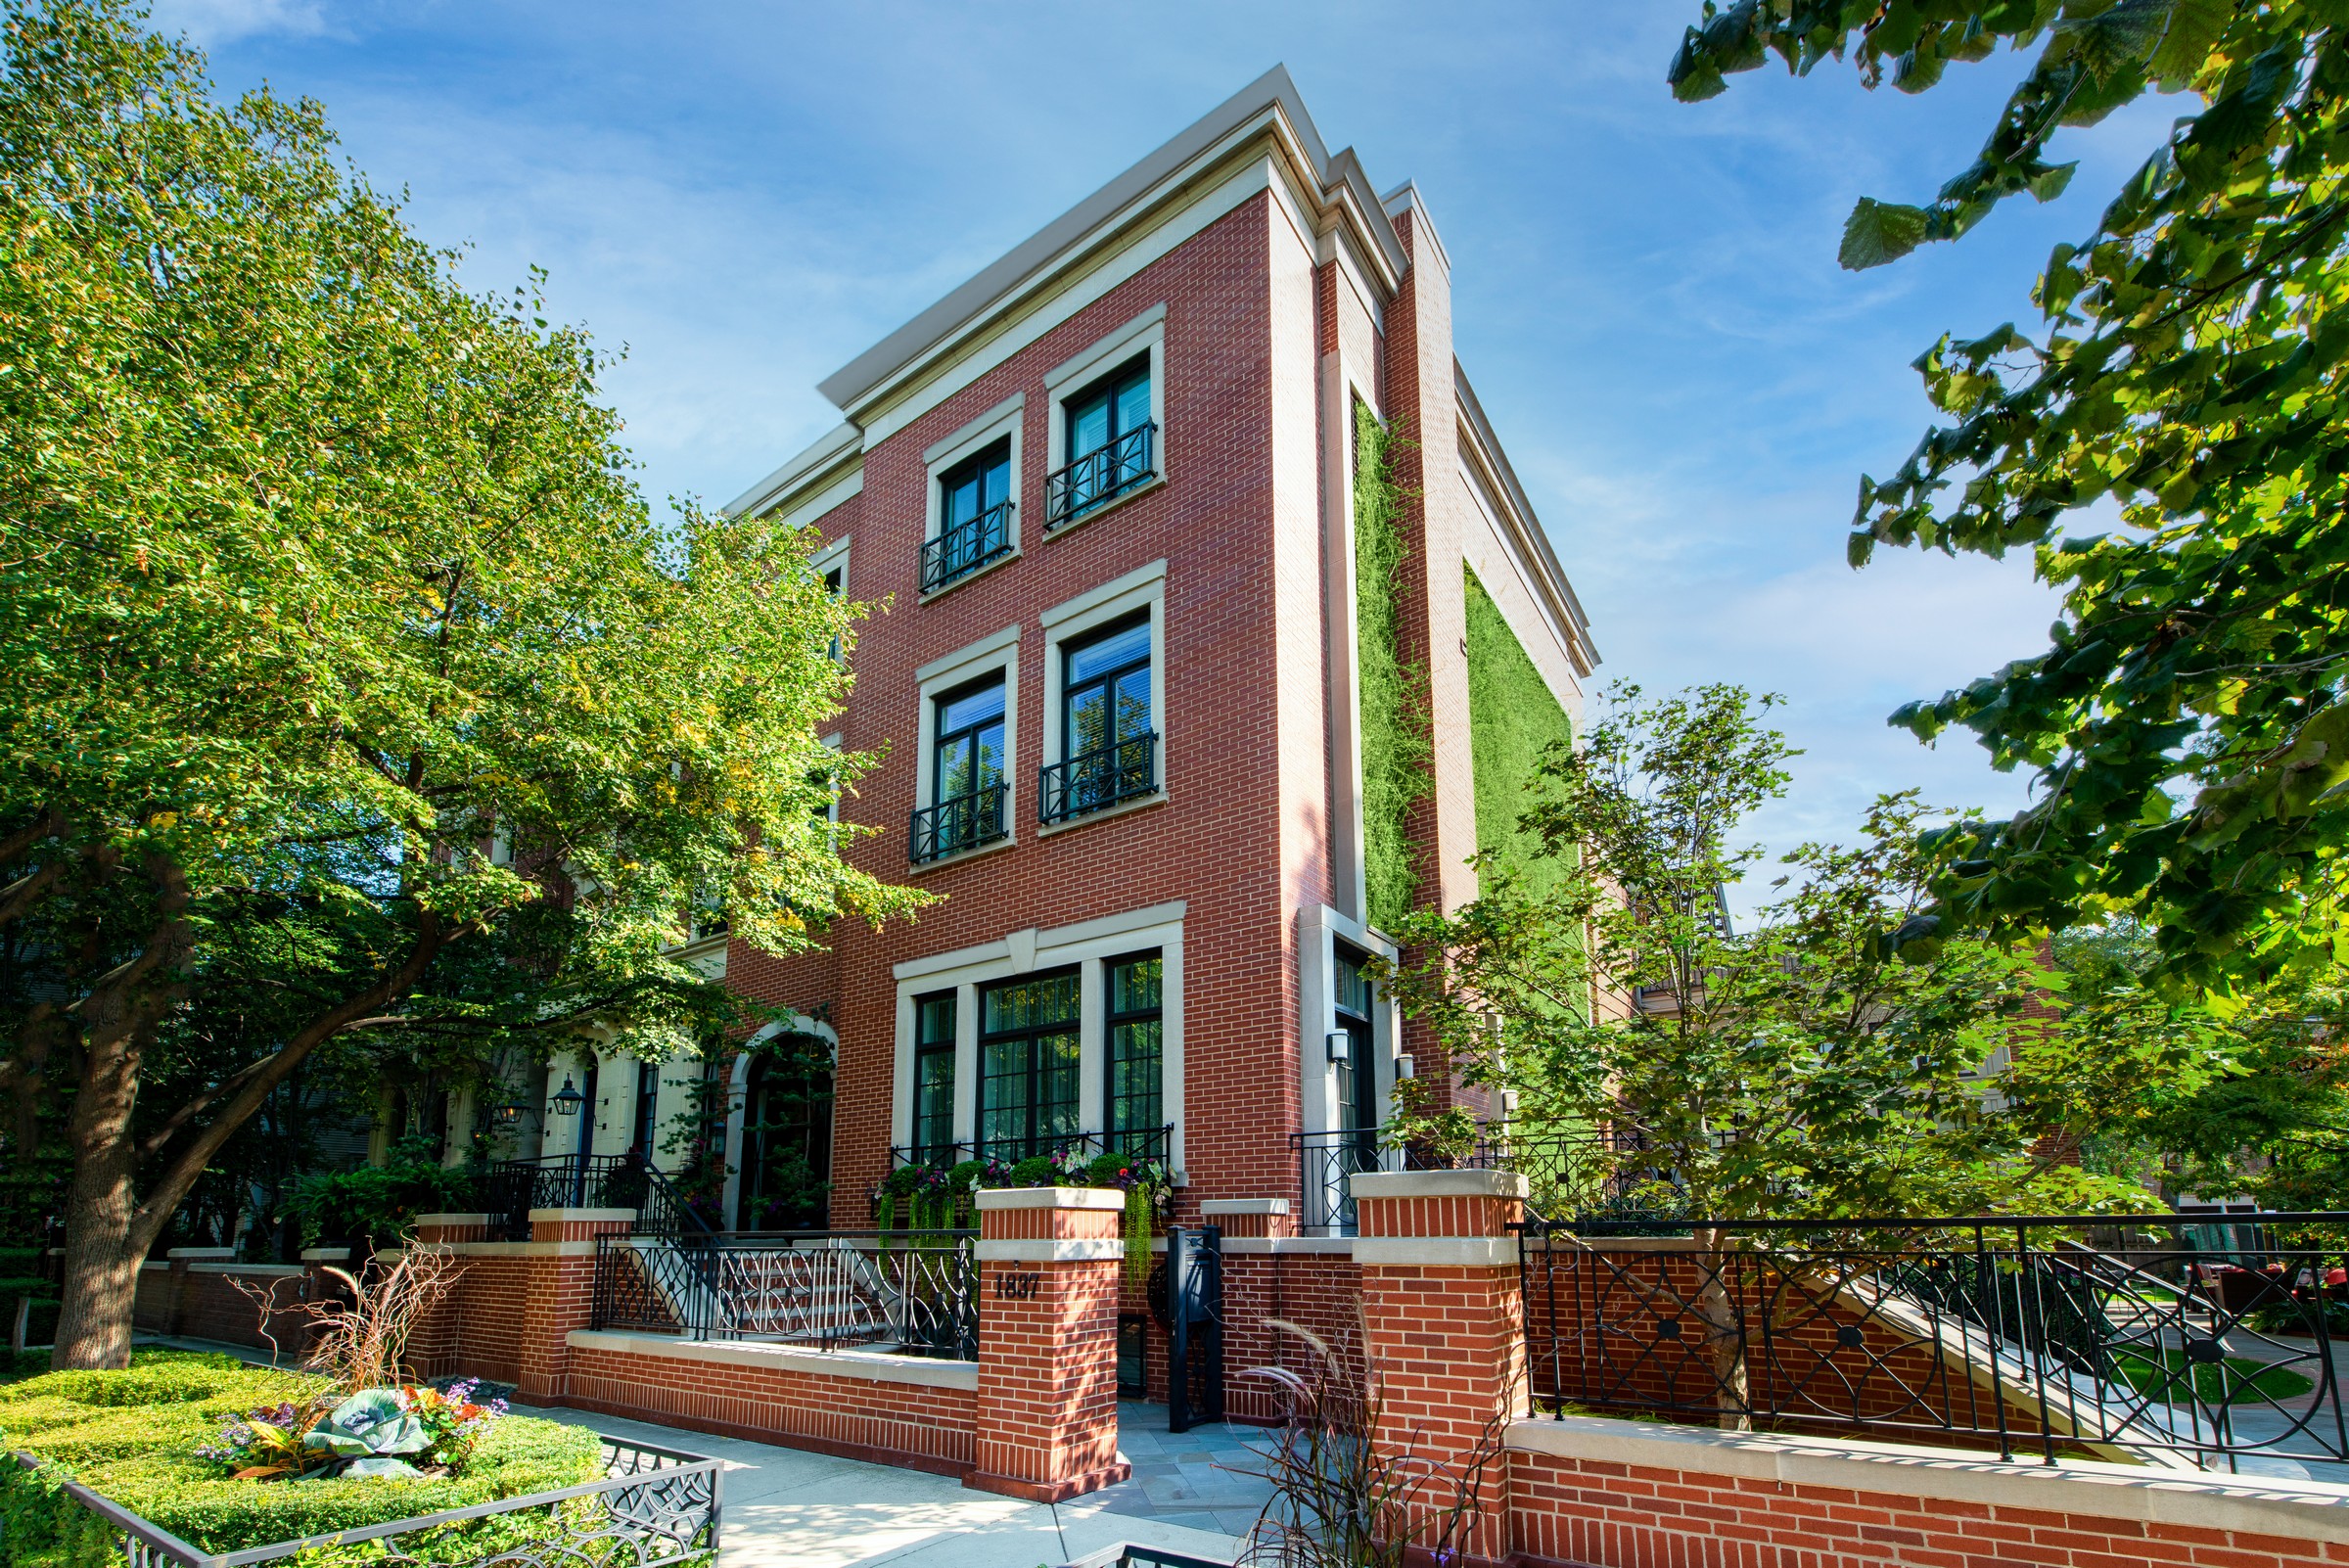 Janet Owen sold the residence at 1837 N. Orchard, Chicago, IL, the highest single family detached sale in the city of Chicago and state of Illinois. Andrew Miller Photography.